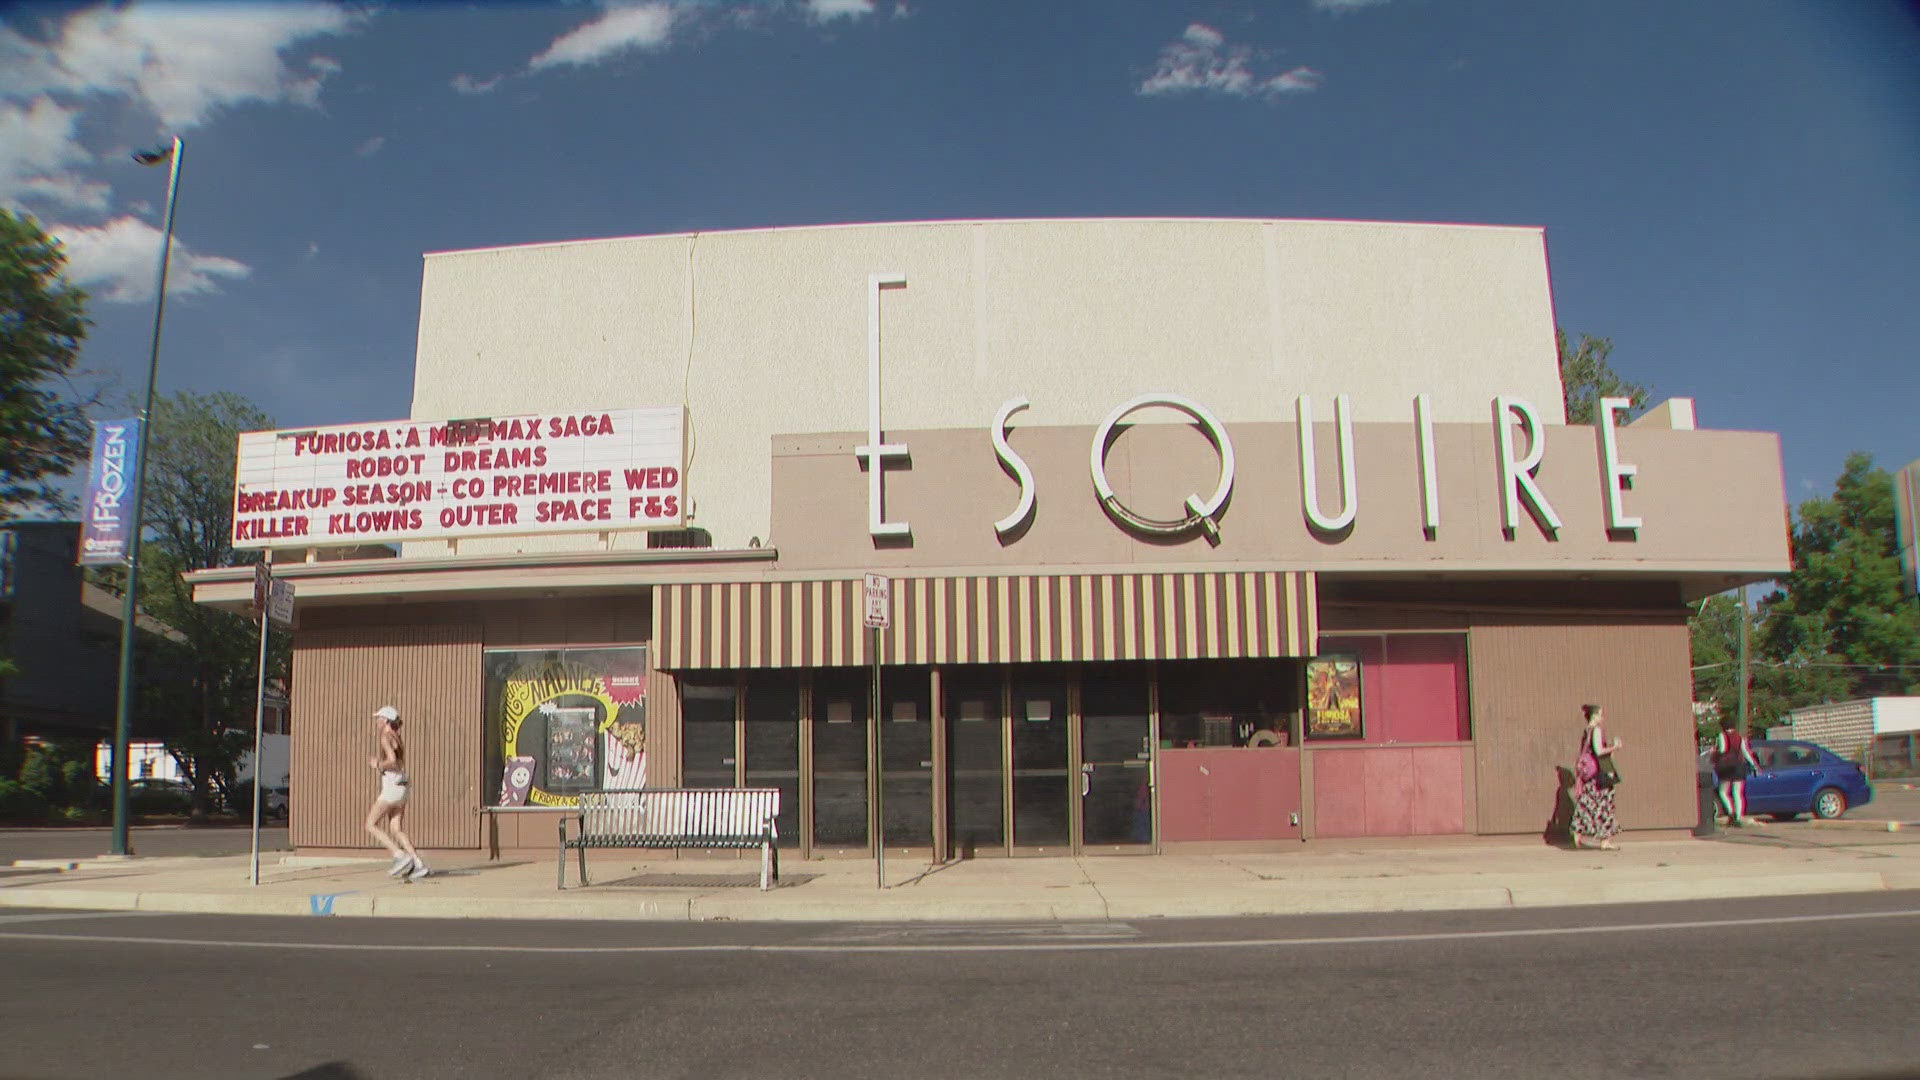 The Esquire Theater will close its doors after a 97-year run, but not before holding a movie premiere for a local film director's first film to hit the screen.